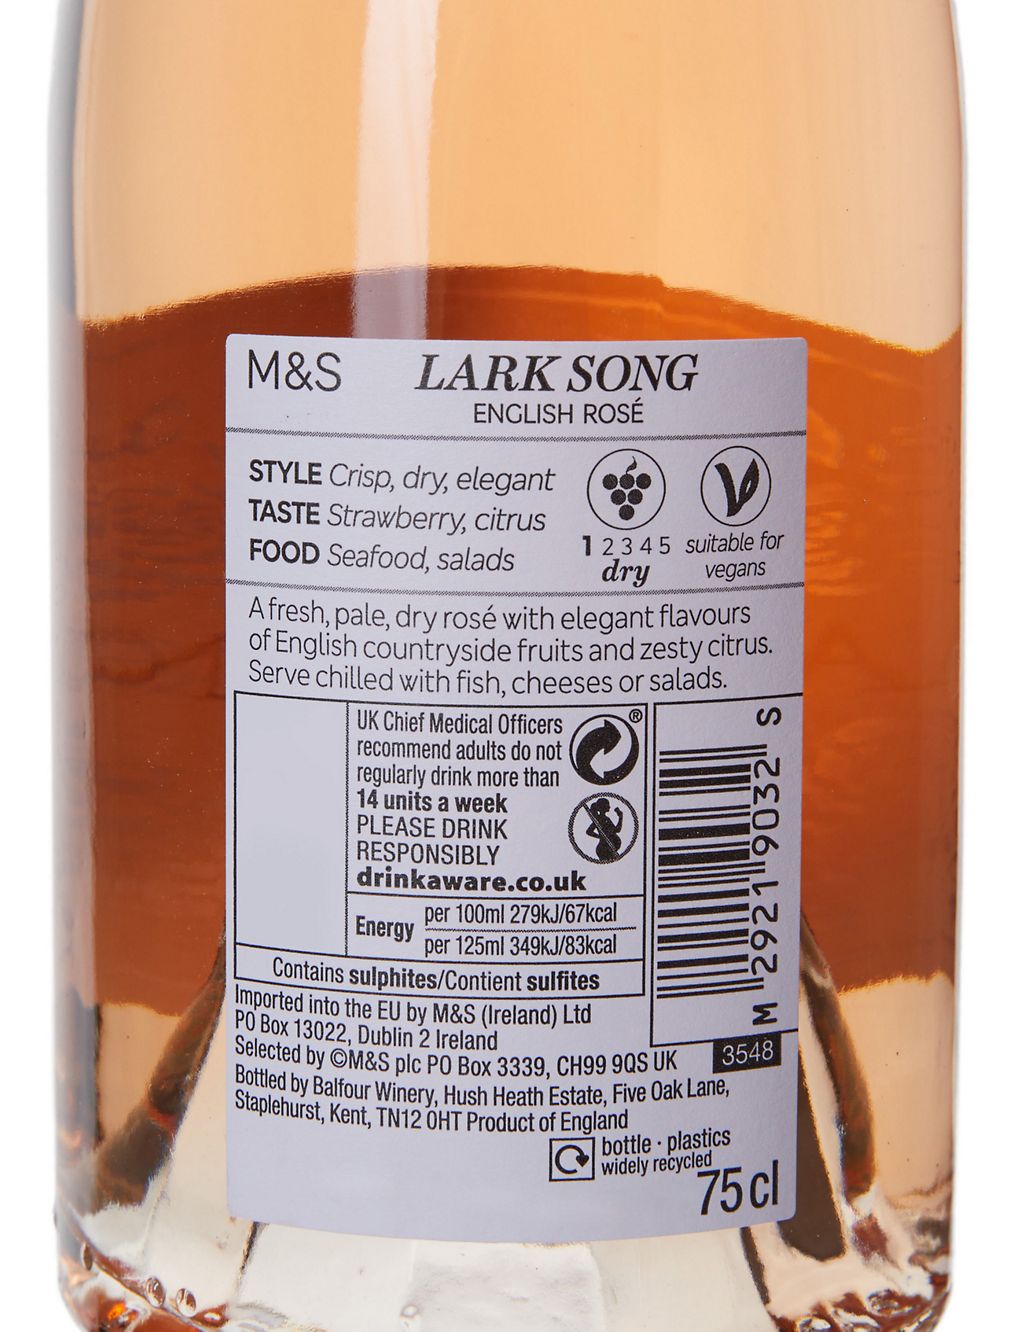 Lark Song English Rosé by Balfour - Case of 6 2 of 3